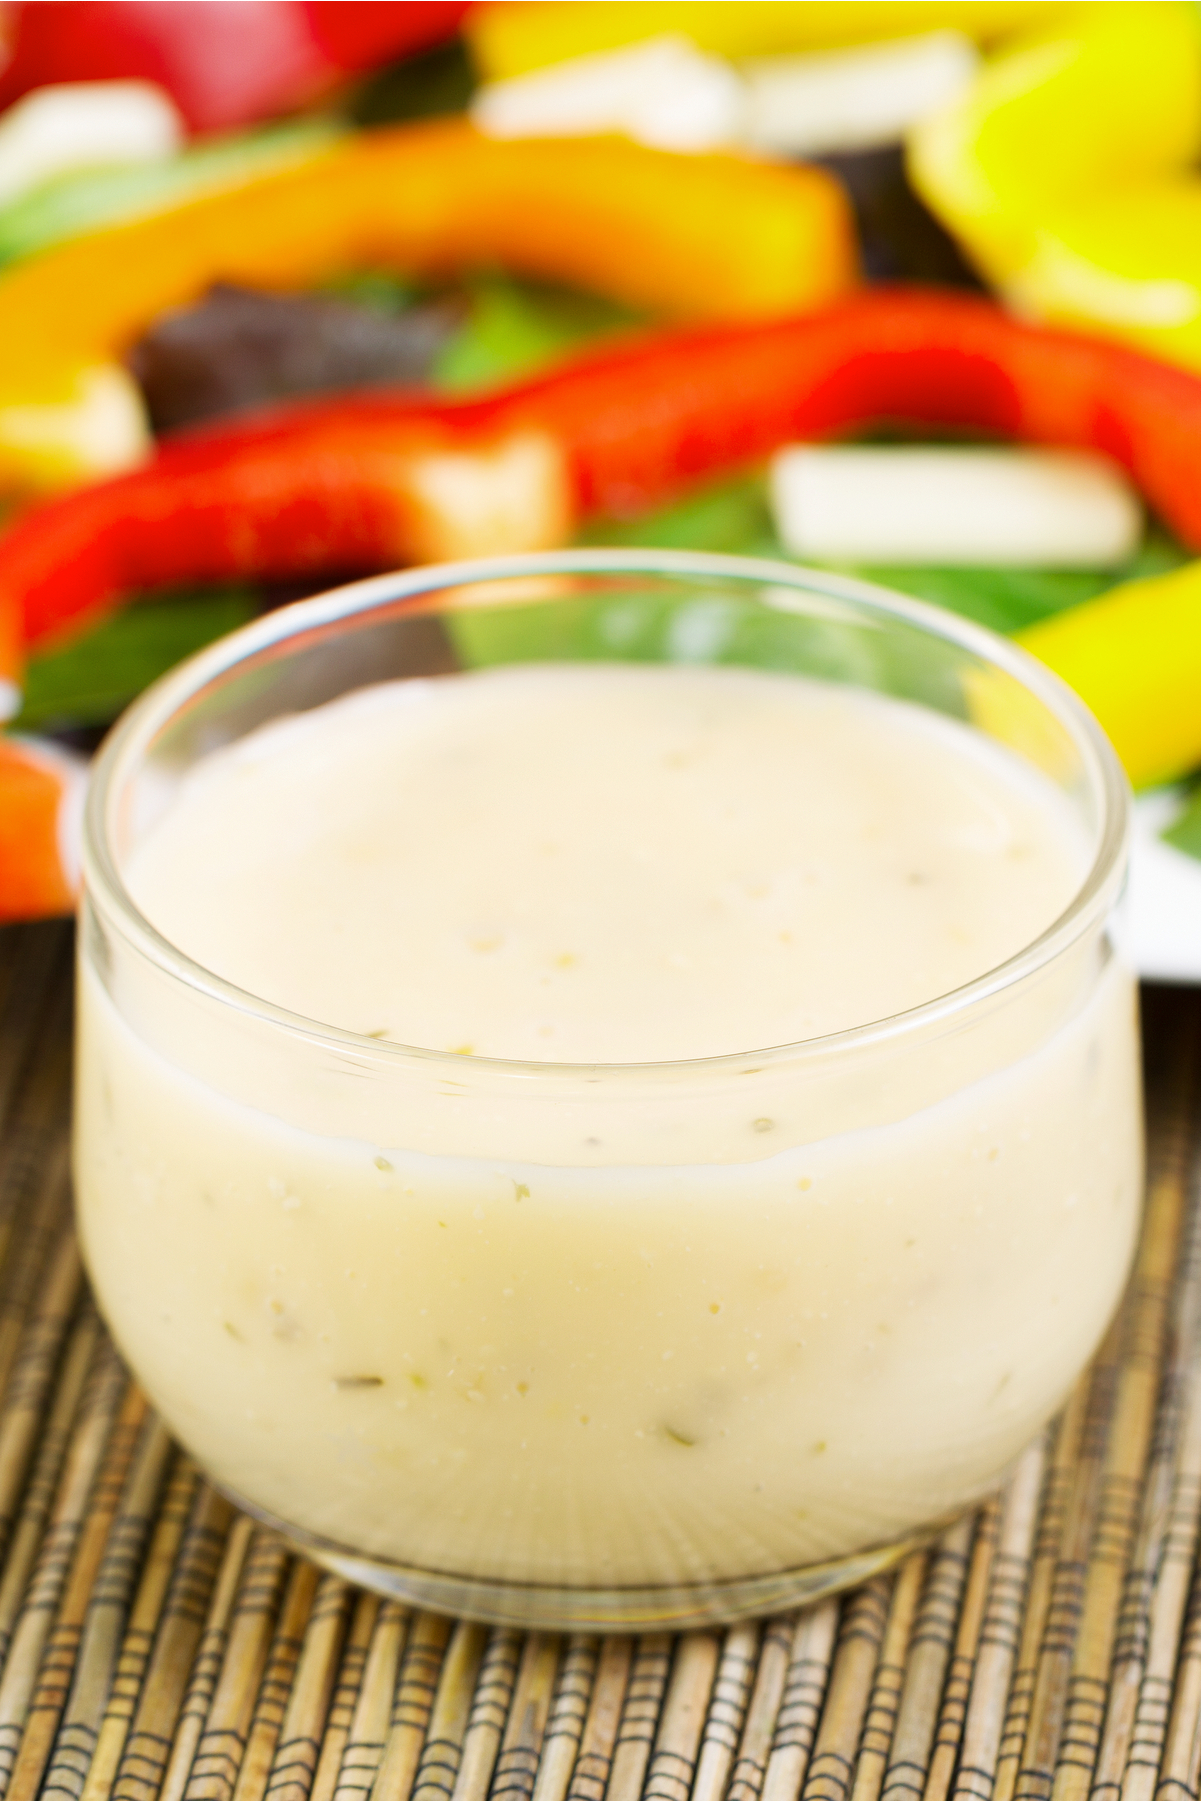 Weight Watchers Copycat Olive Garden Italian Salad Dressing in a glass with out of focus vegetables behind it.